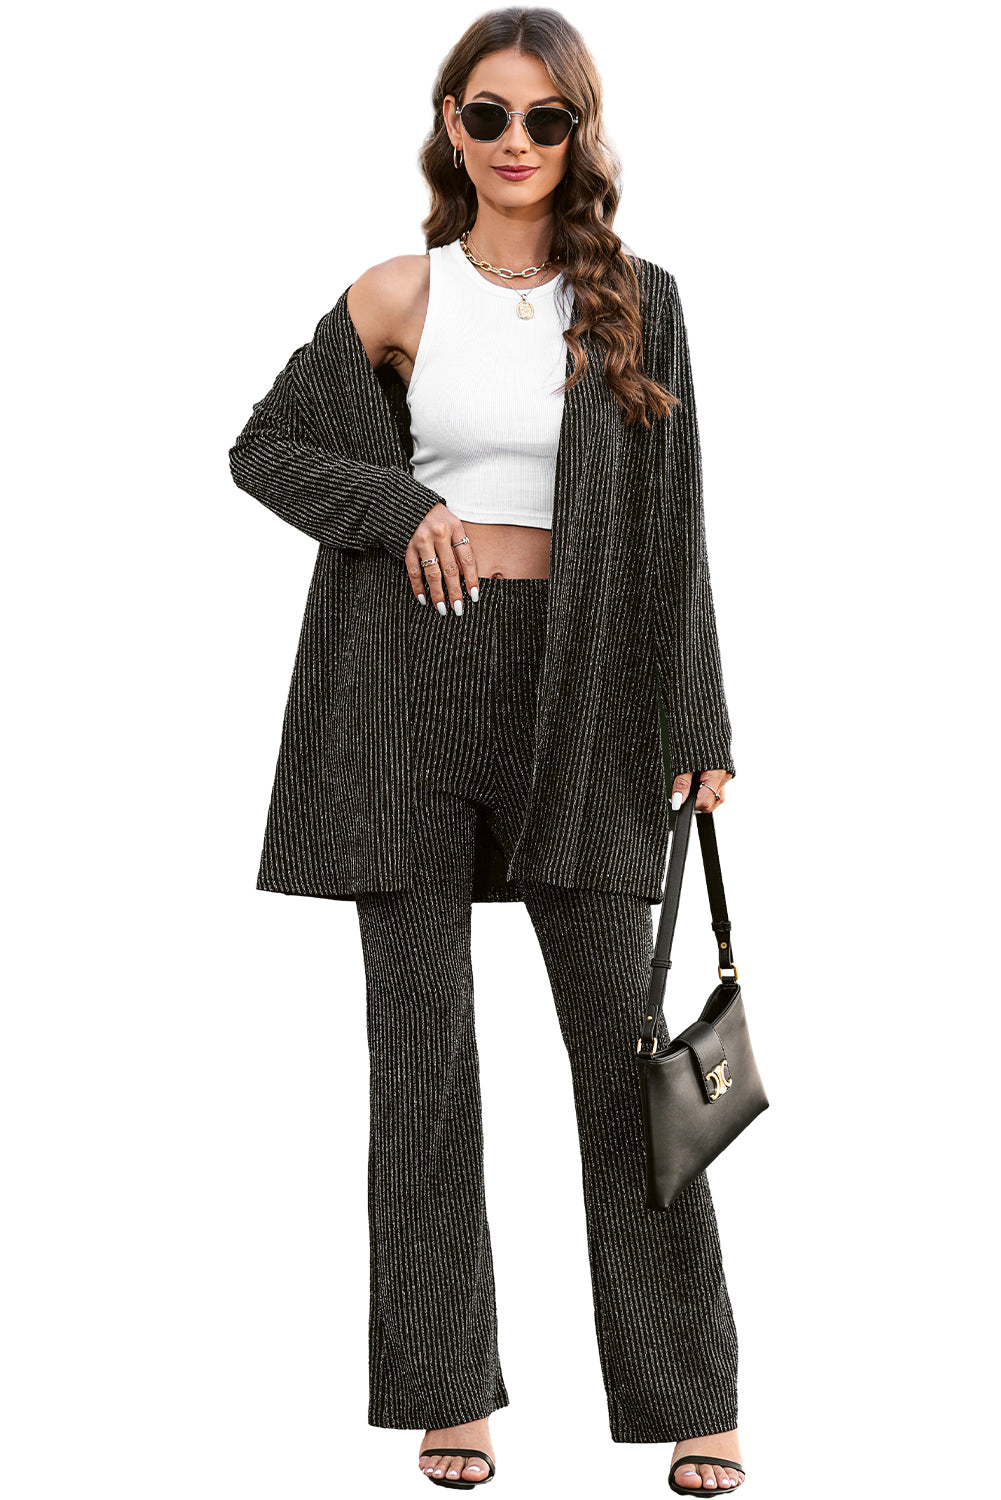 Black Metallic Ribbed Cardigan and Flare Pants Outfit